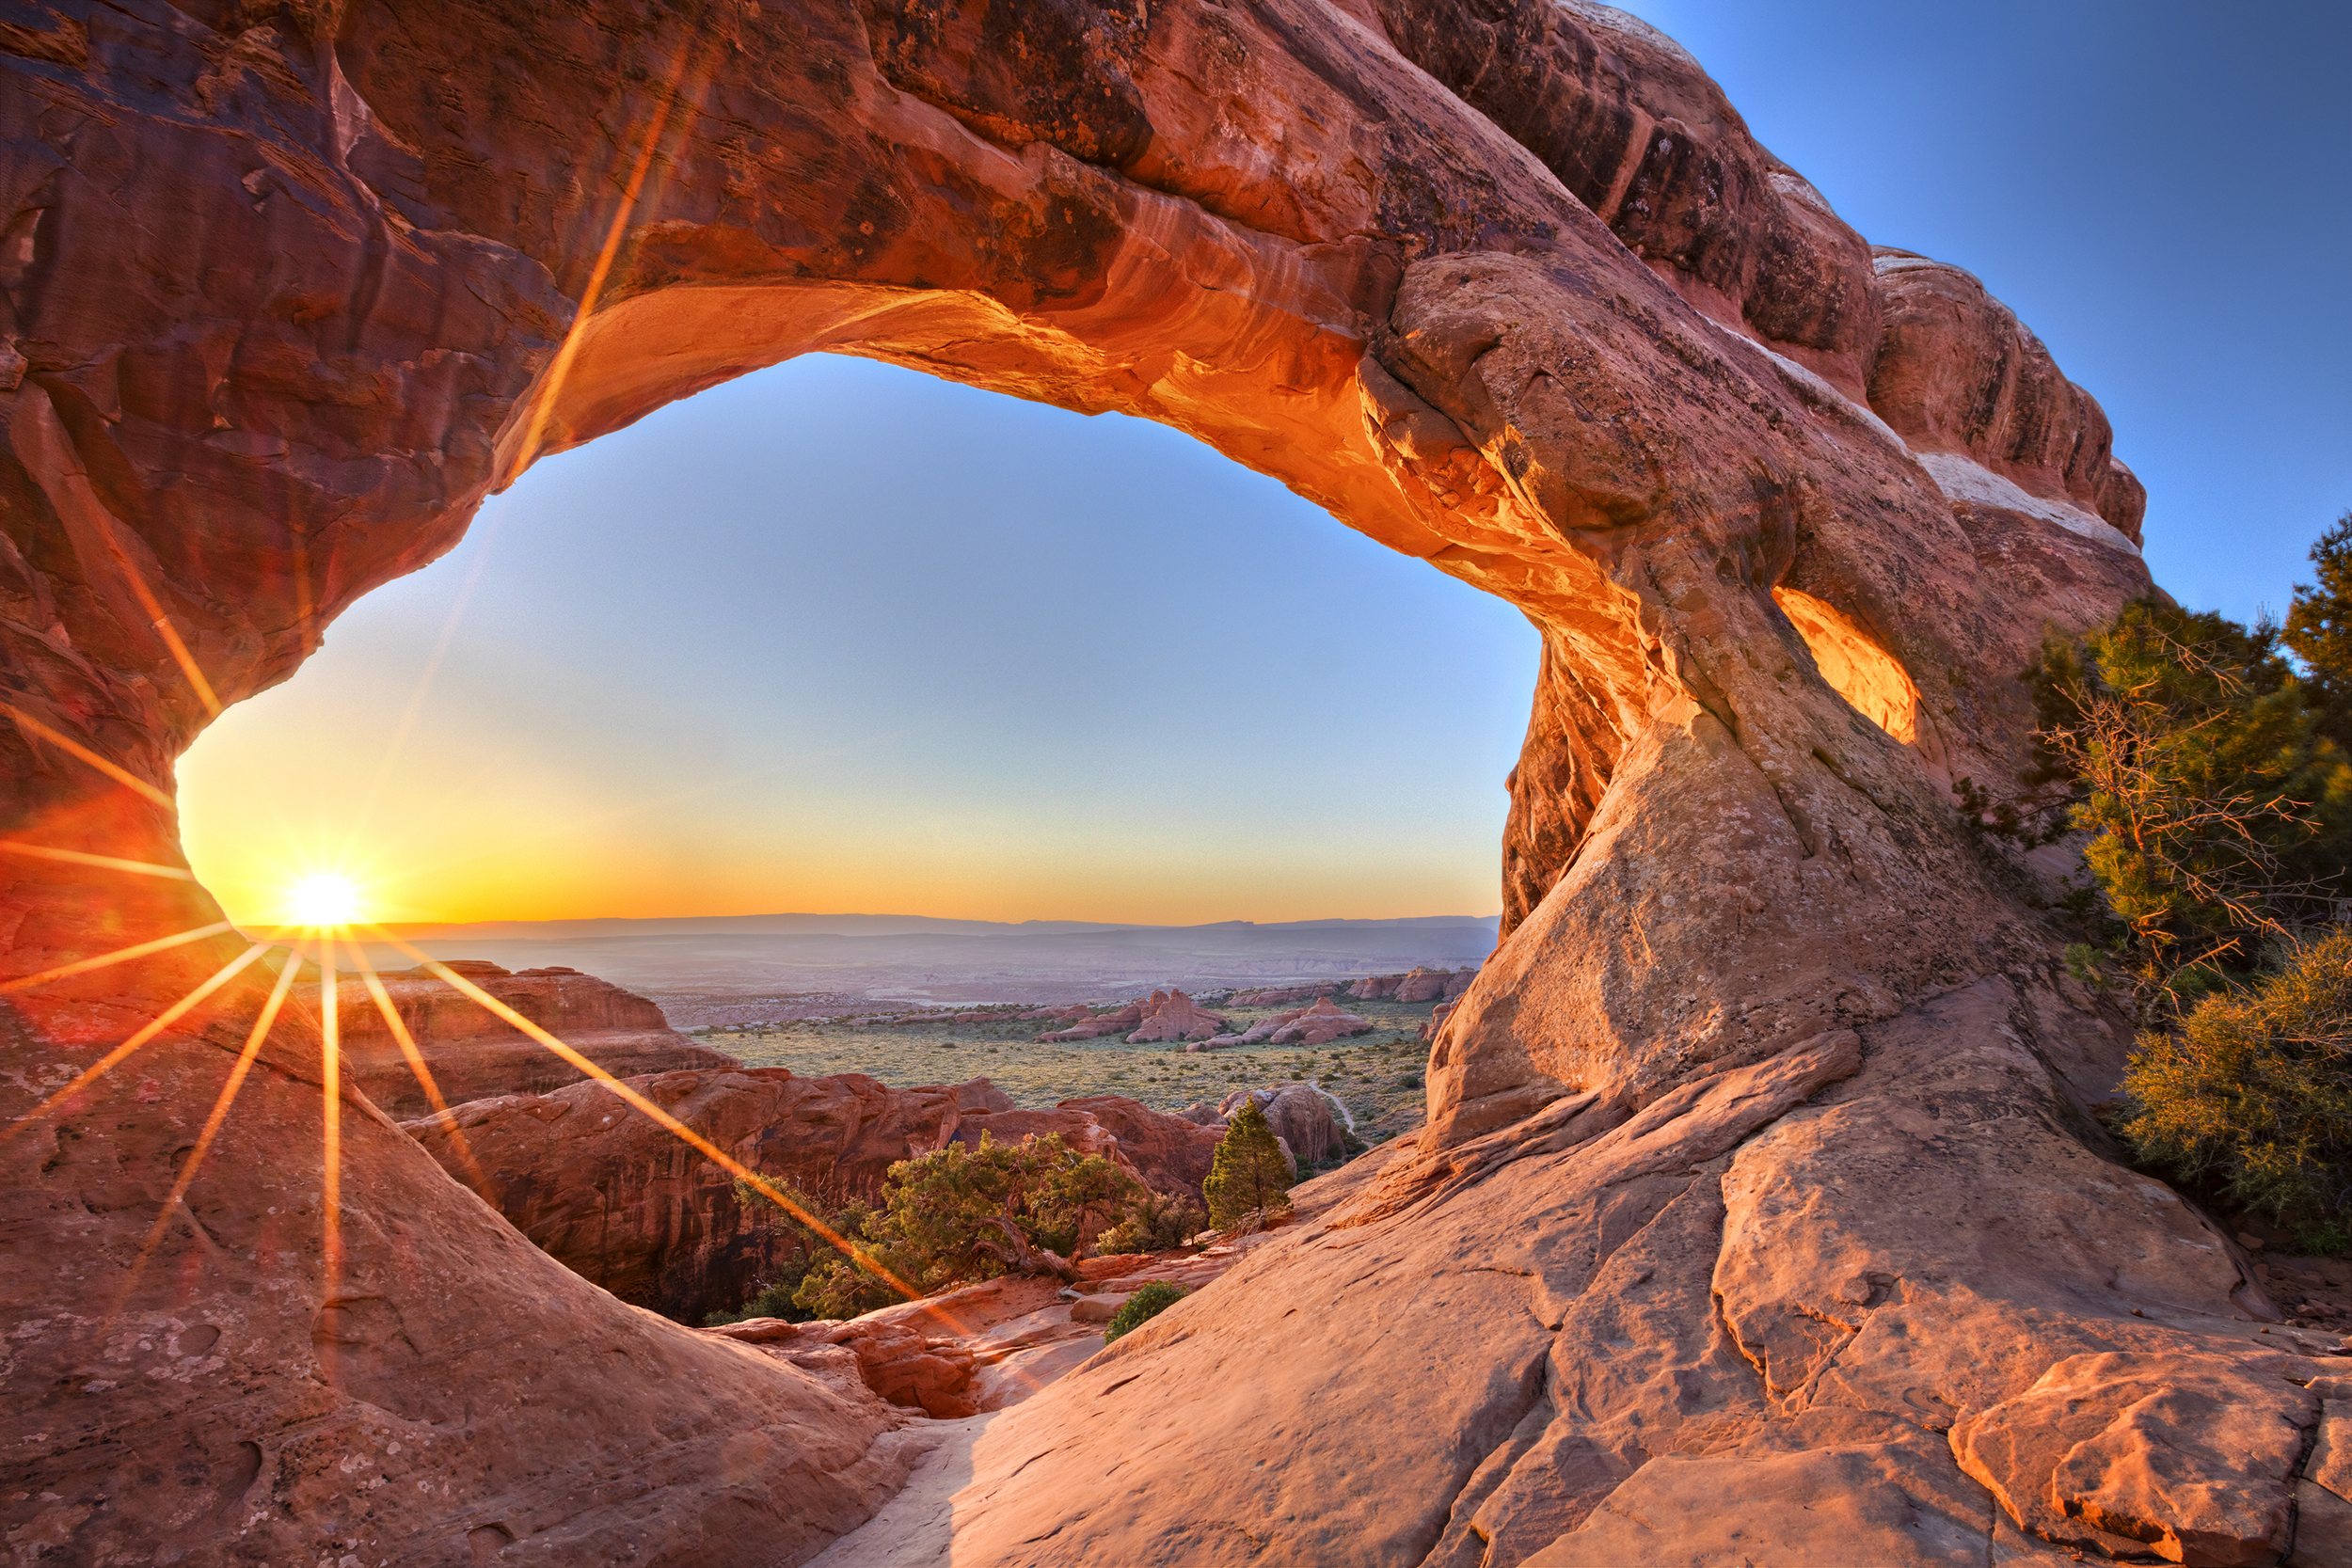 <p>Utah is home to some of the country's most striking and unusual landscapes, and <a href="https://www.nps.gov/arch/index.htm">Arches National Park</a> is one of the best places to take it all in. Often described as a red-rock wonderland, the park is home to some 2,000 natural stone arches as well as many soaring rock pinnacles and giant balanced rocks. There are also plenty of trails for hiking. Don't miss sticking around for sunset over this jaw-dropping landscape. </p><p><b>For more great travel guides and vacation tips,</b> <a href="https://cheapism.us14.list-manage.com/subscribe?u=de966e79b38e1d833d5781074&id=c14db36dd0">please sign up for our free newsletters</a></p><p class="tooltip-inner">https://cheapism.us14.list-manage.com/subscribe?u=de966e79b38e1d833d5781074&id=c14db36dd0</p>.